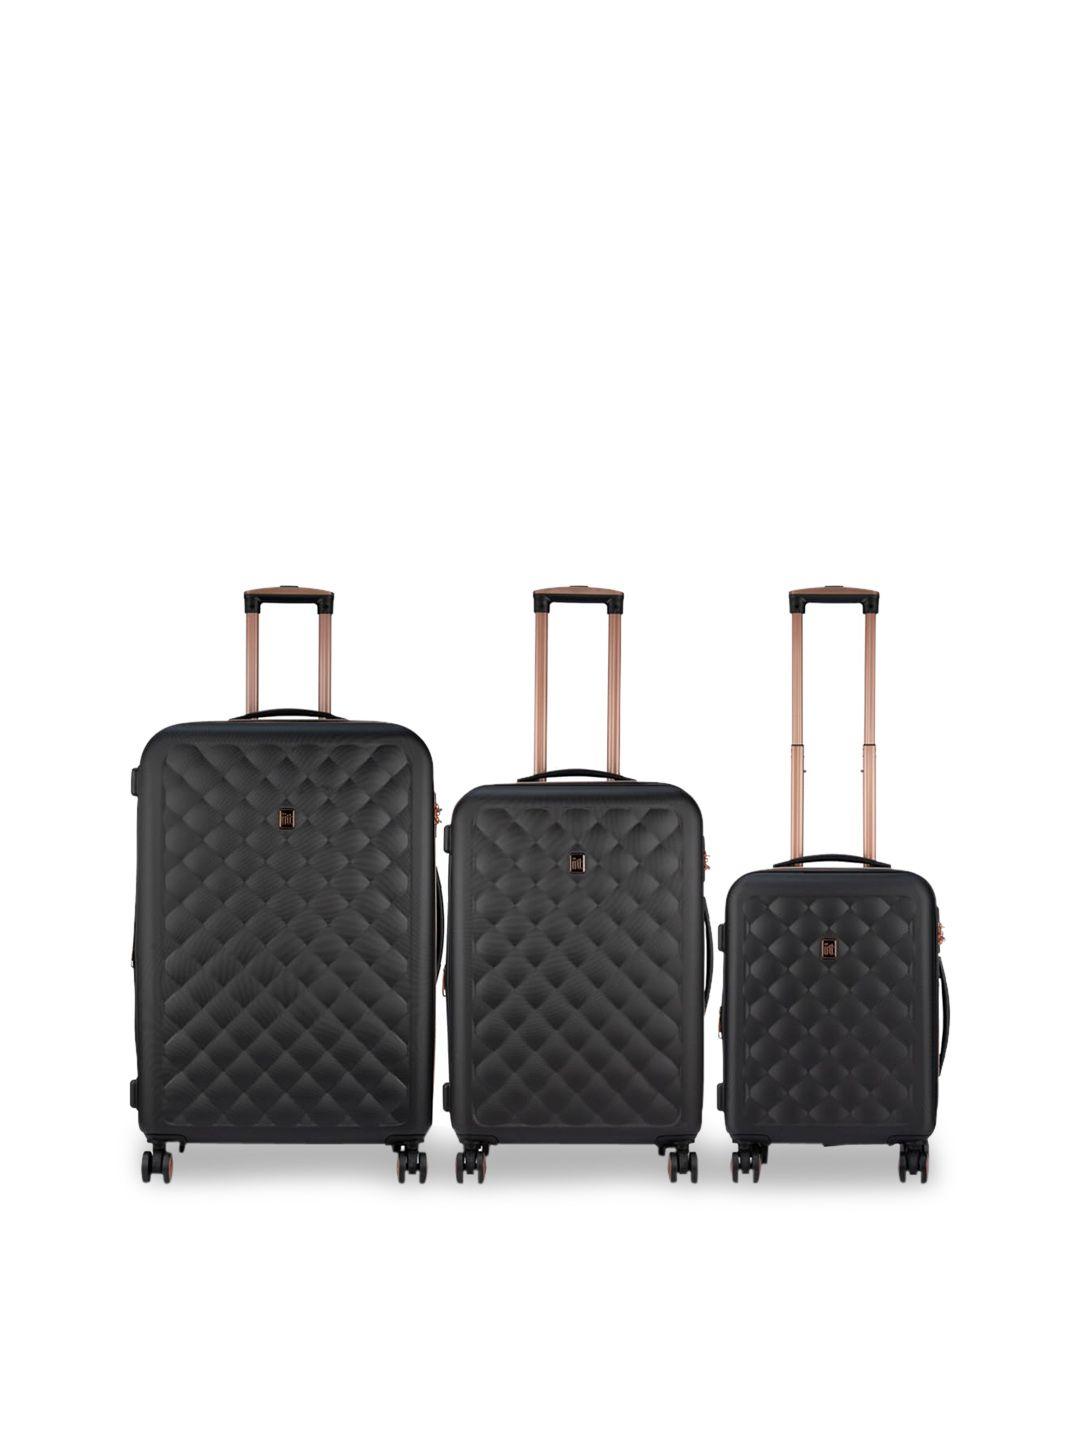 it luggage set of 3 black textured hard-sided trolley suitcases